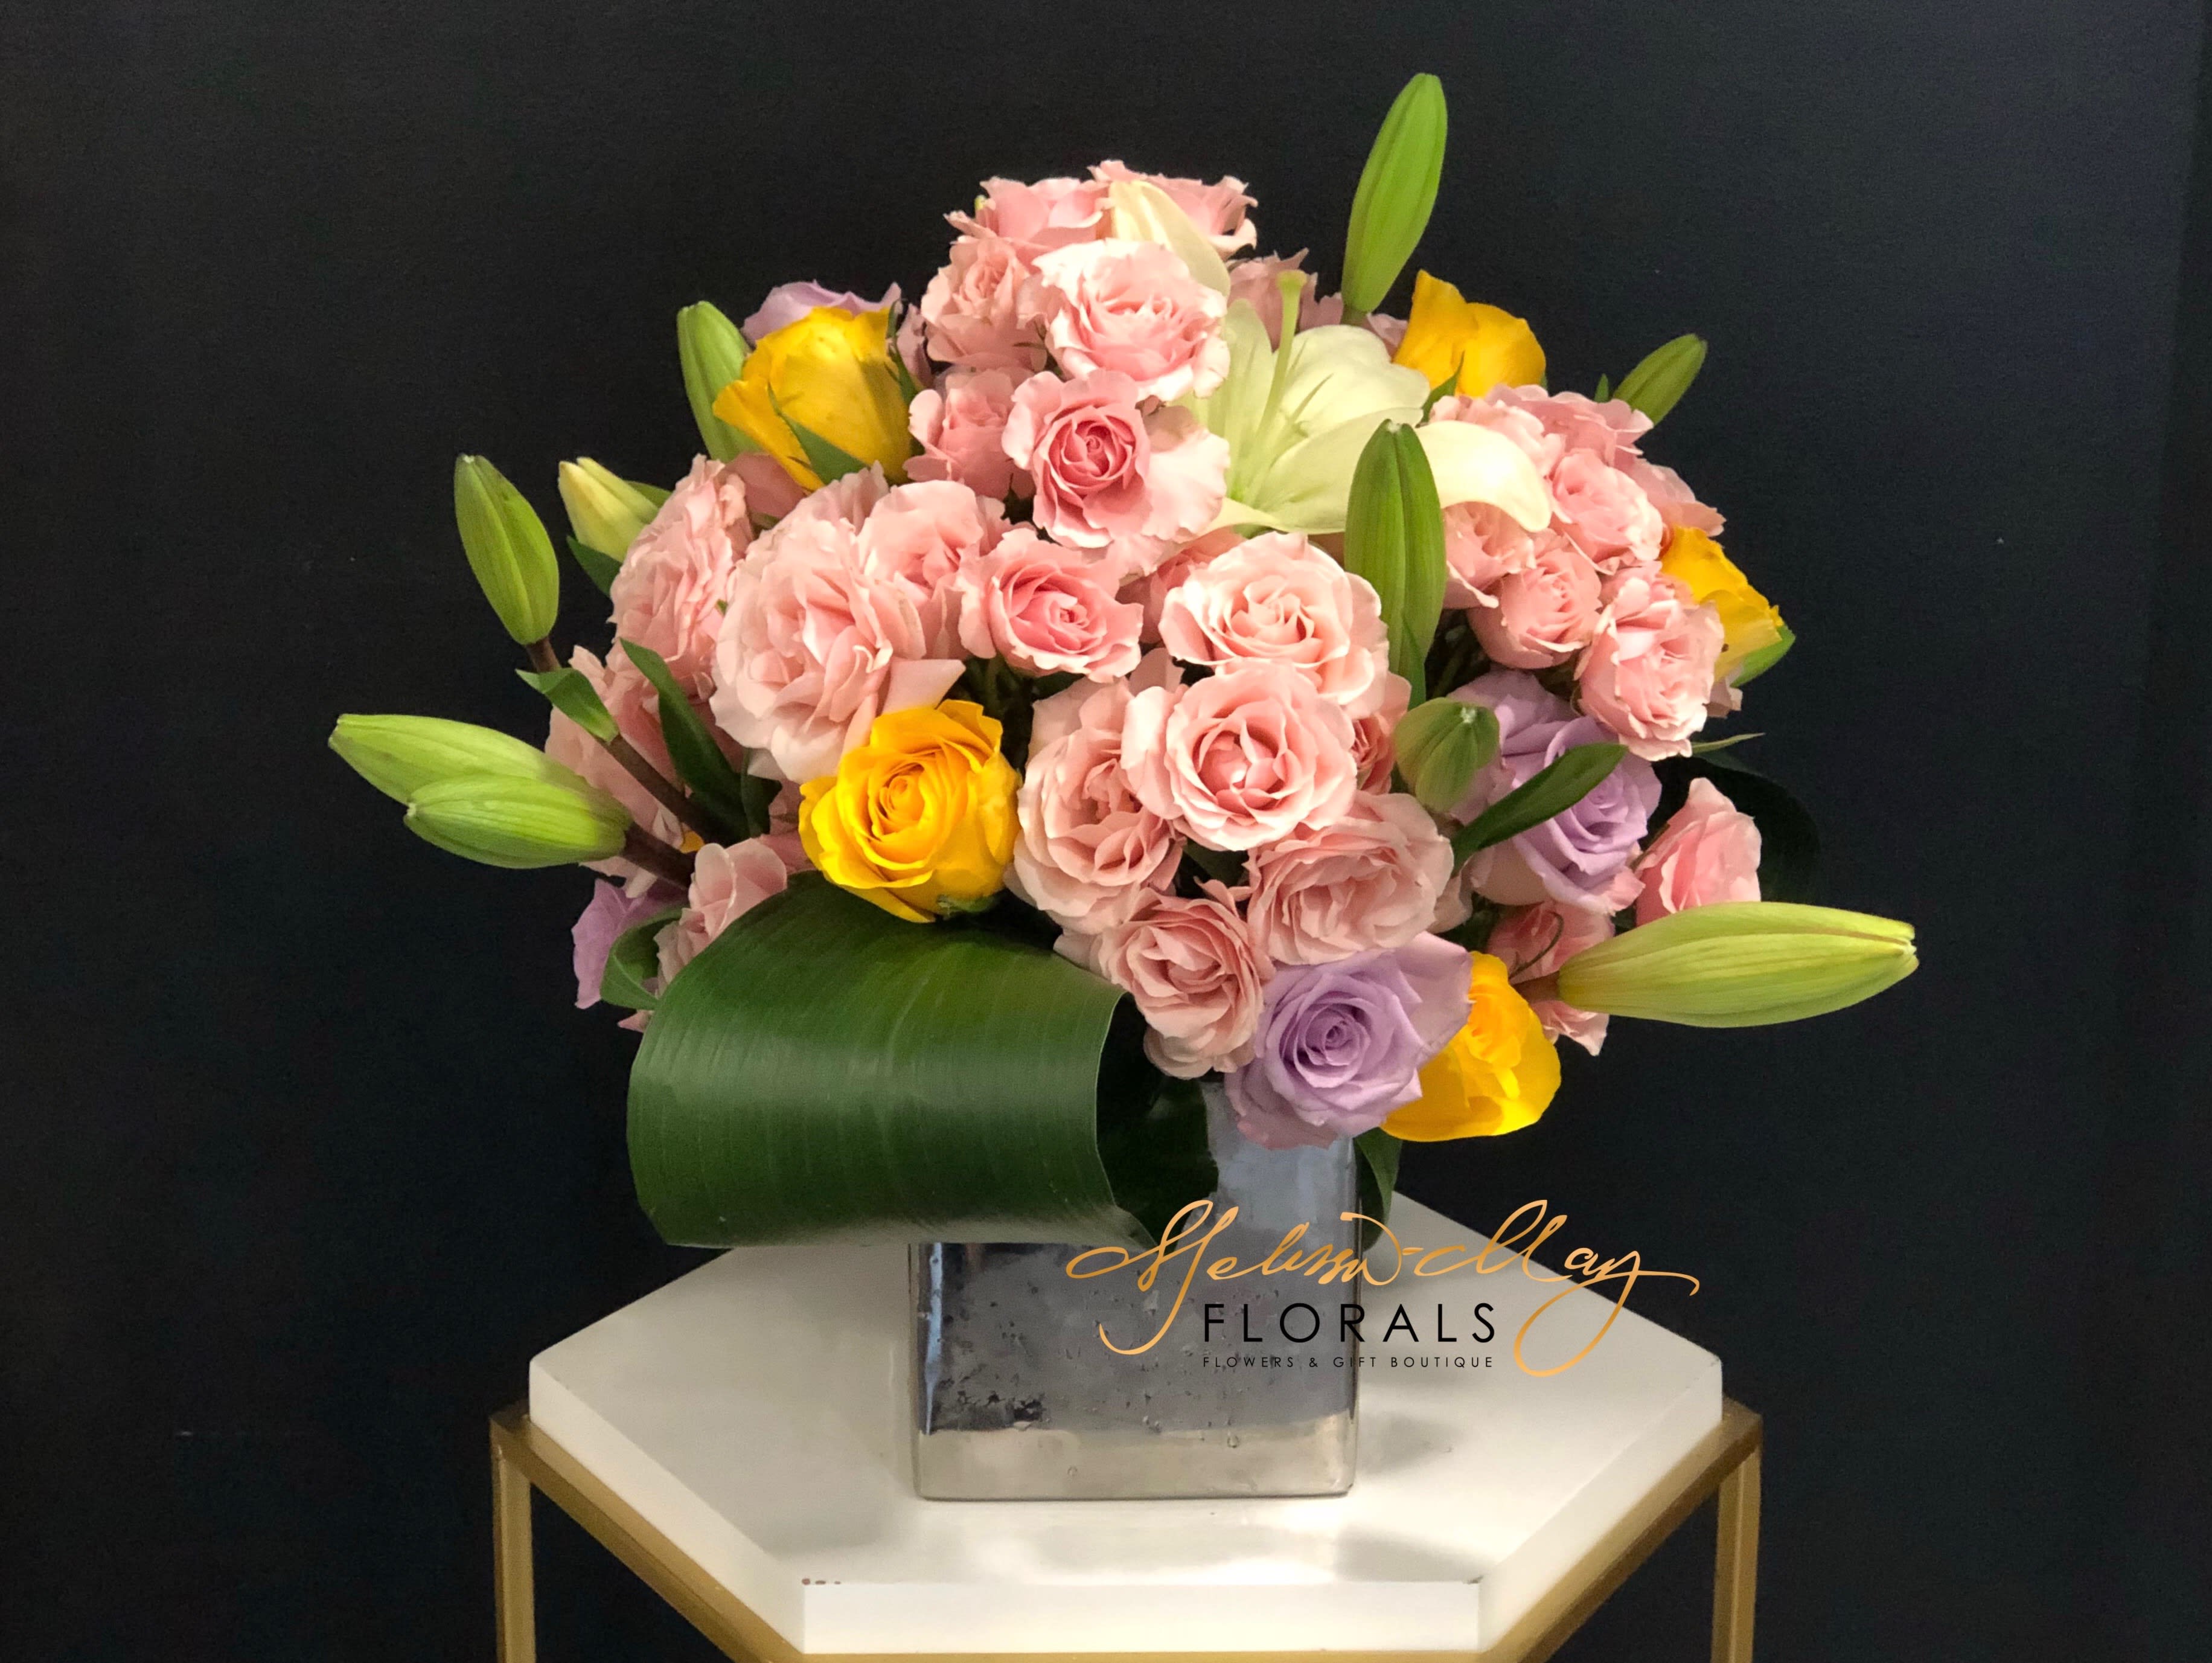 Florists Design - An arrangement you will instantly fall in love with, each flower is picked to create the perfect piece just for you. You will find that this the arrangement you always wanted created for you or someone else. The beauty holds the precious pink and lavender spray roses, lilies and lush greenery. 